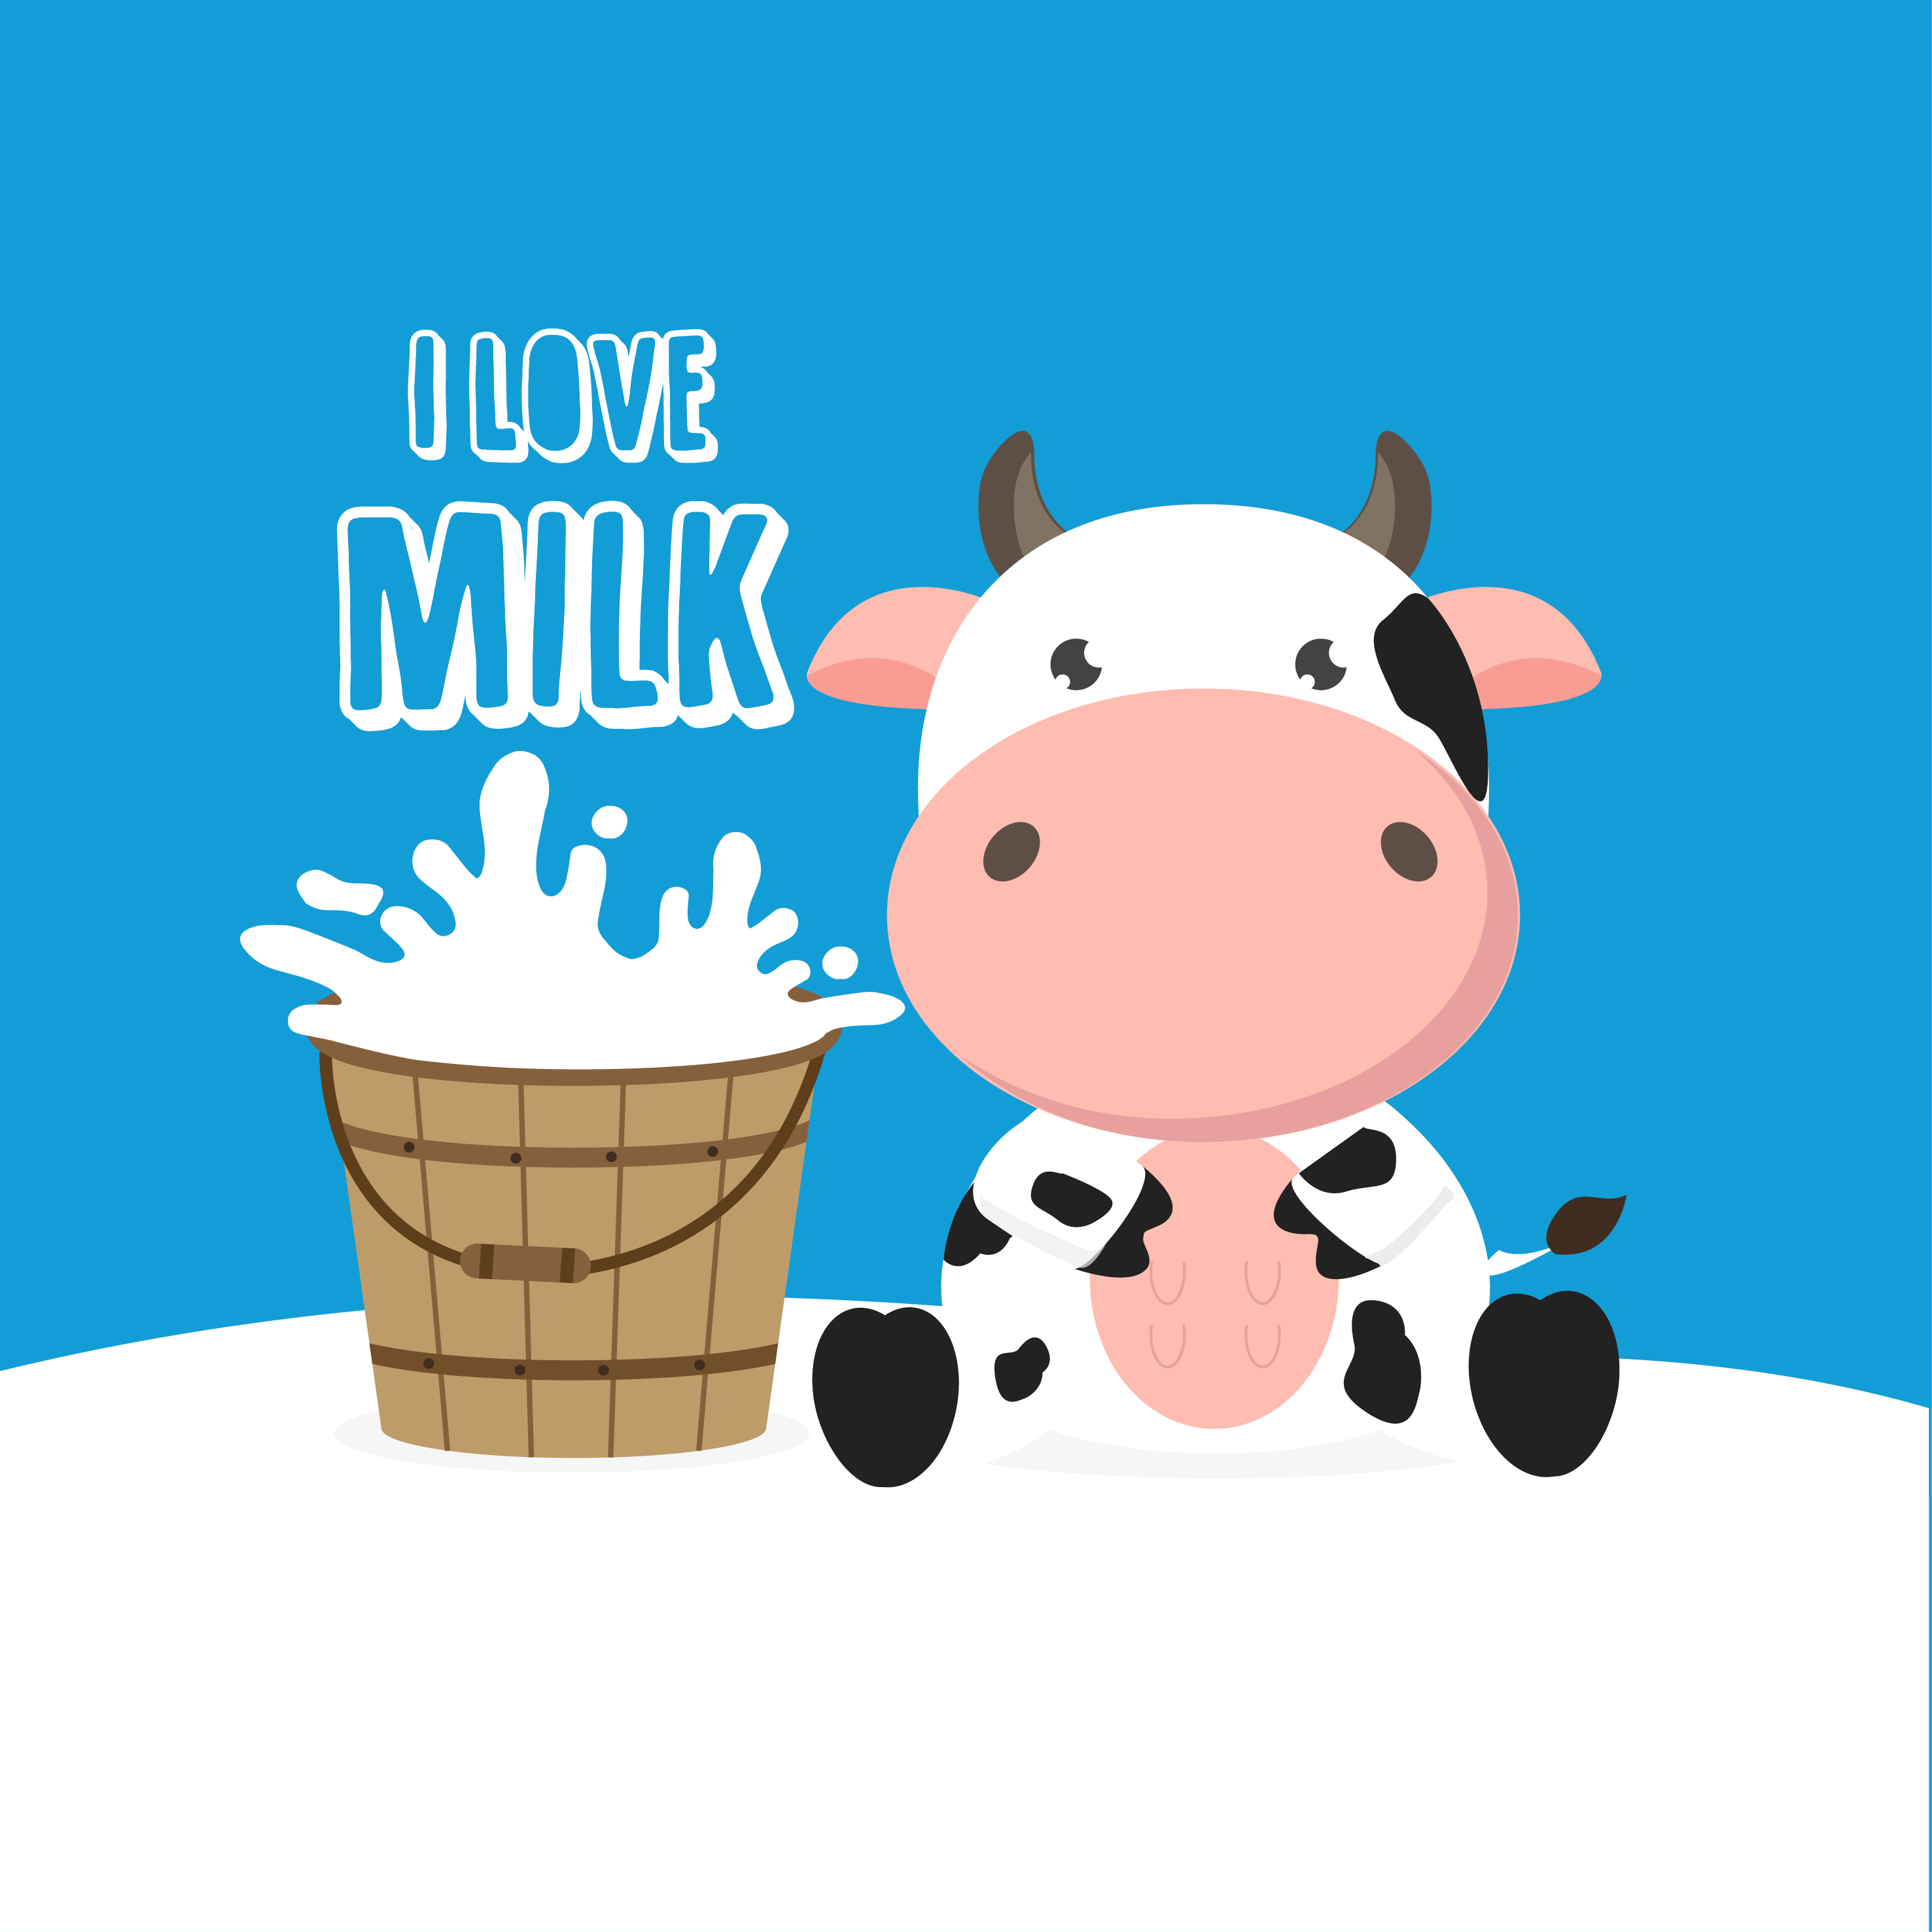 Cute Cow Svg - Free SVG Cut File - Best Free Fonts Design For Your Next